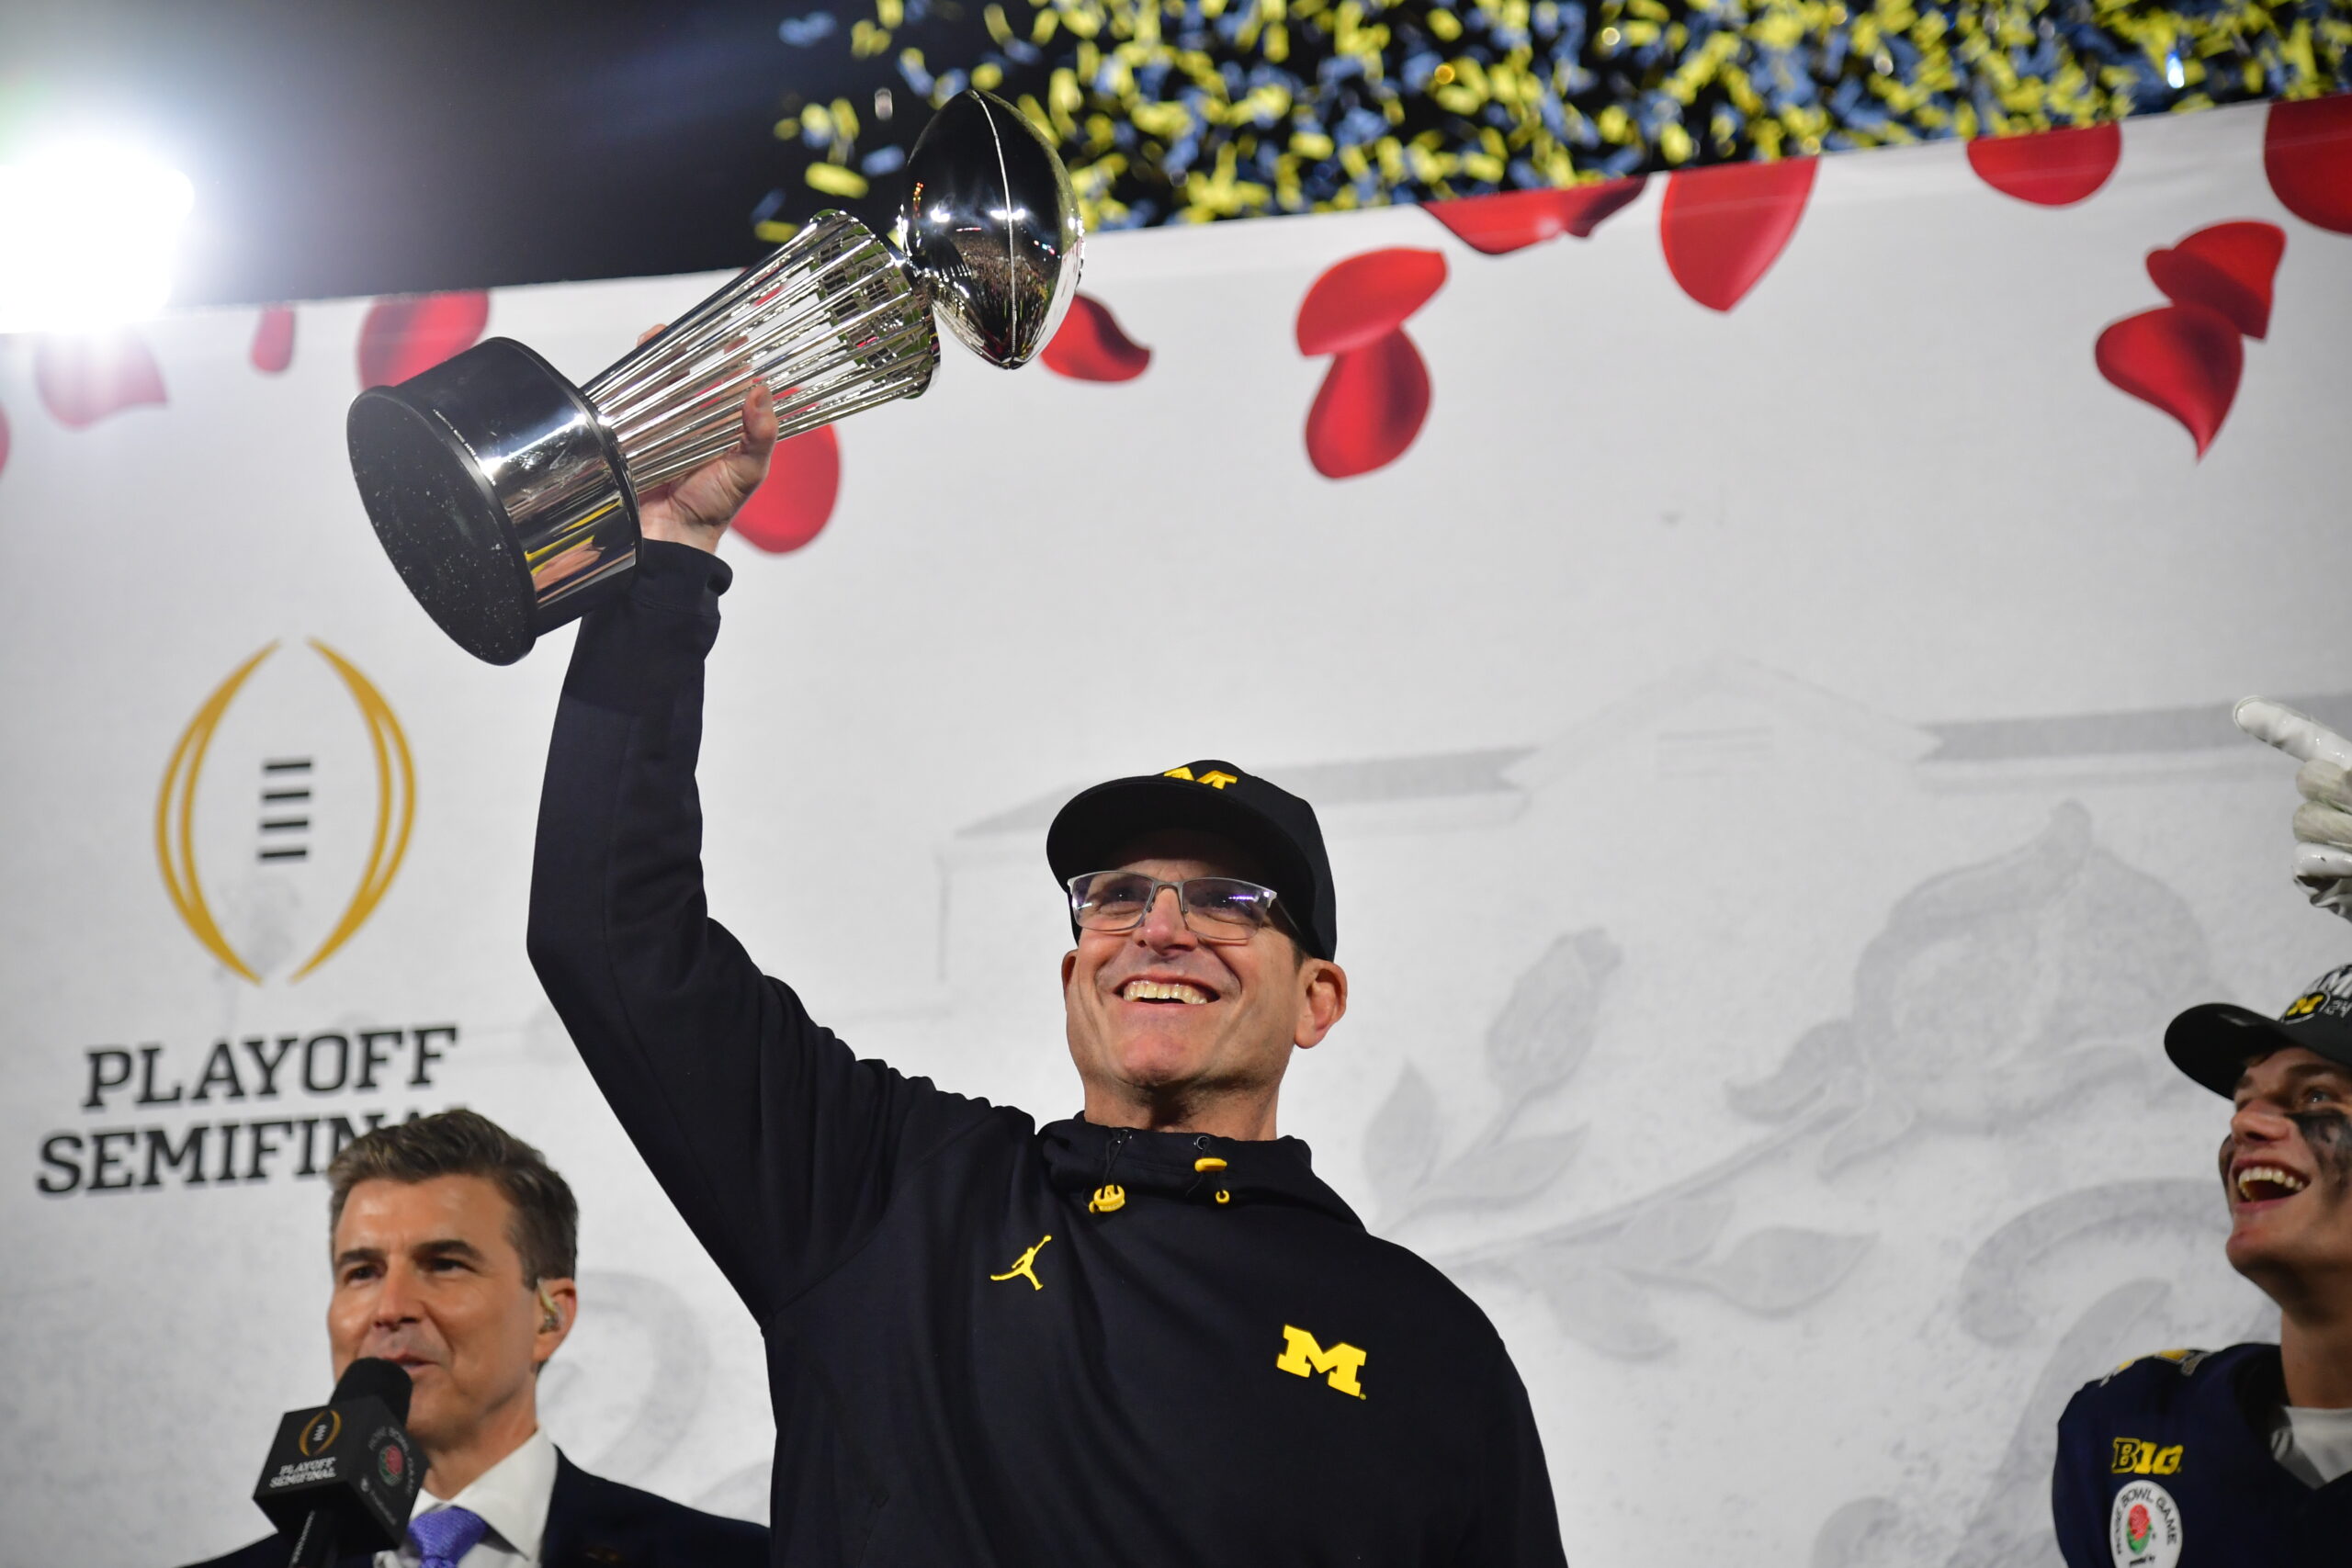 Five reasons why Michigan can win the national championship